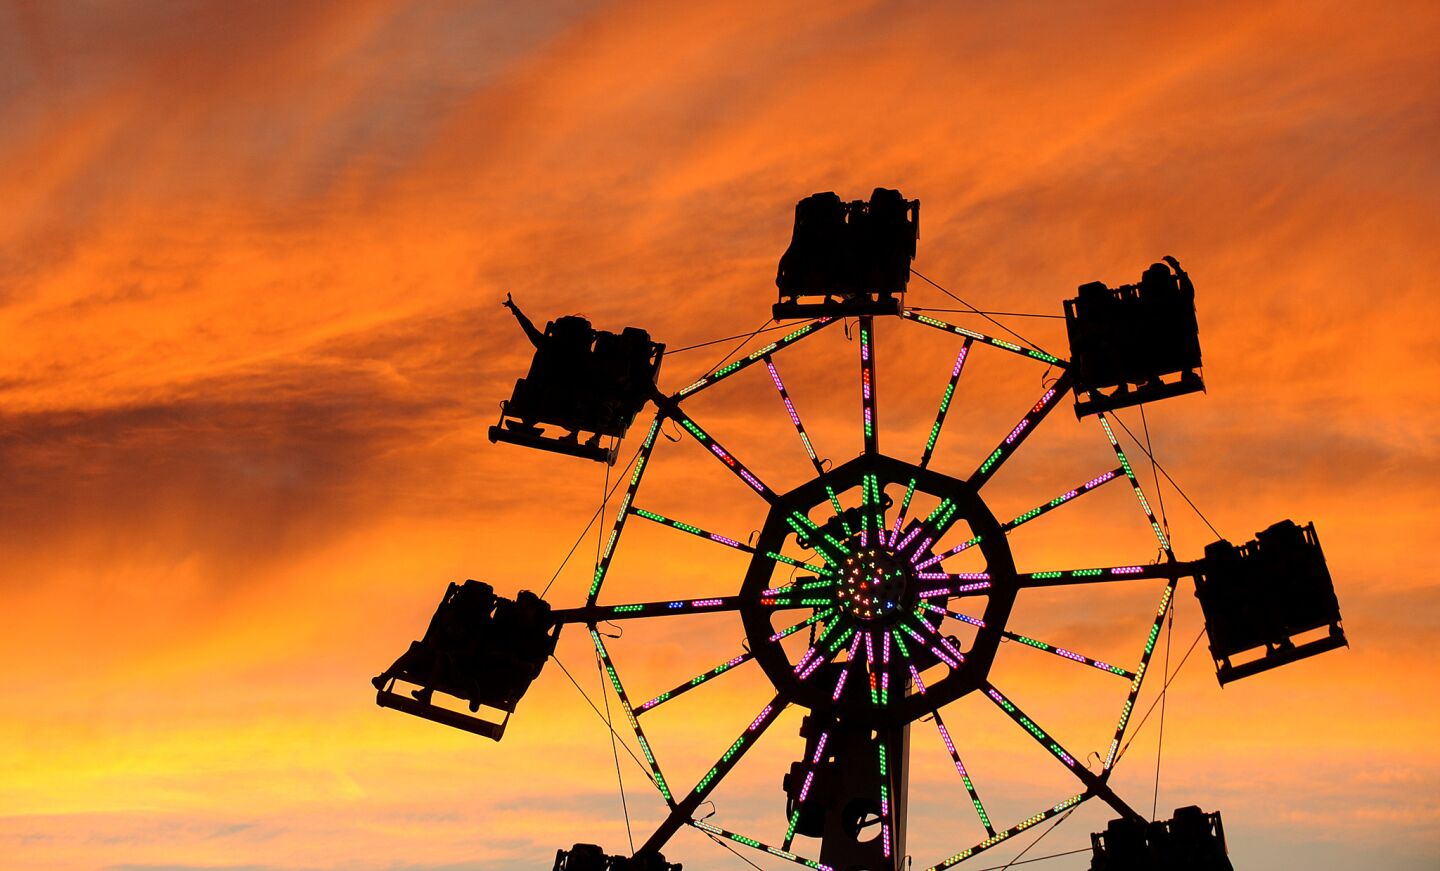 As the sun sets, people enjoy a carnival ride during the Electric Daisy Carnival in Las Vegas on June 17.